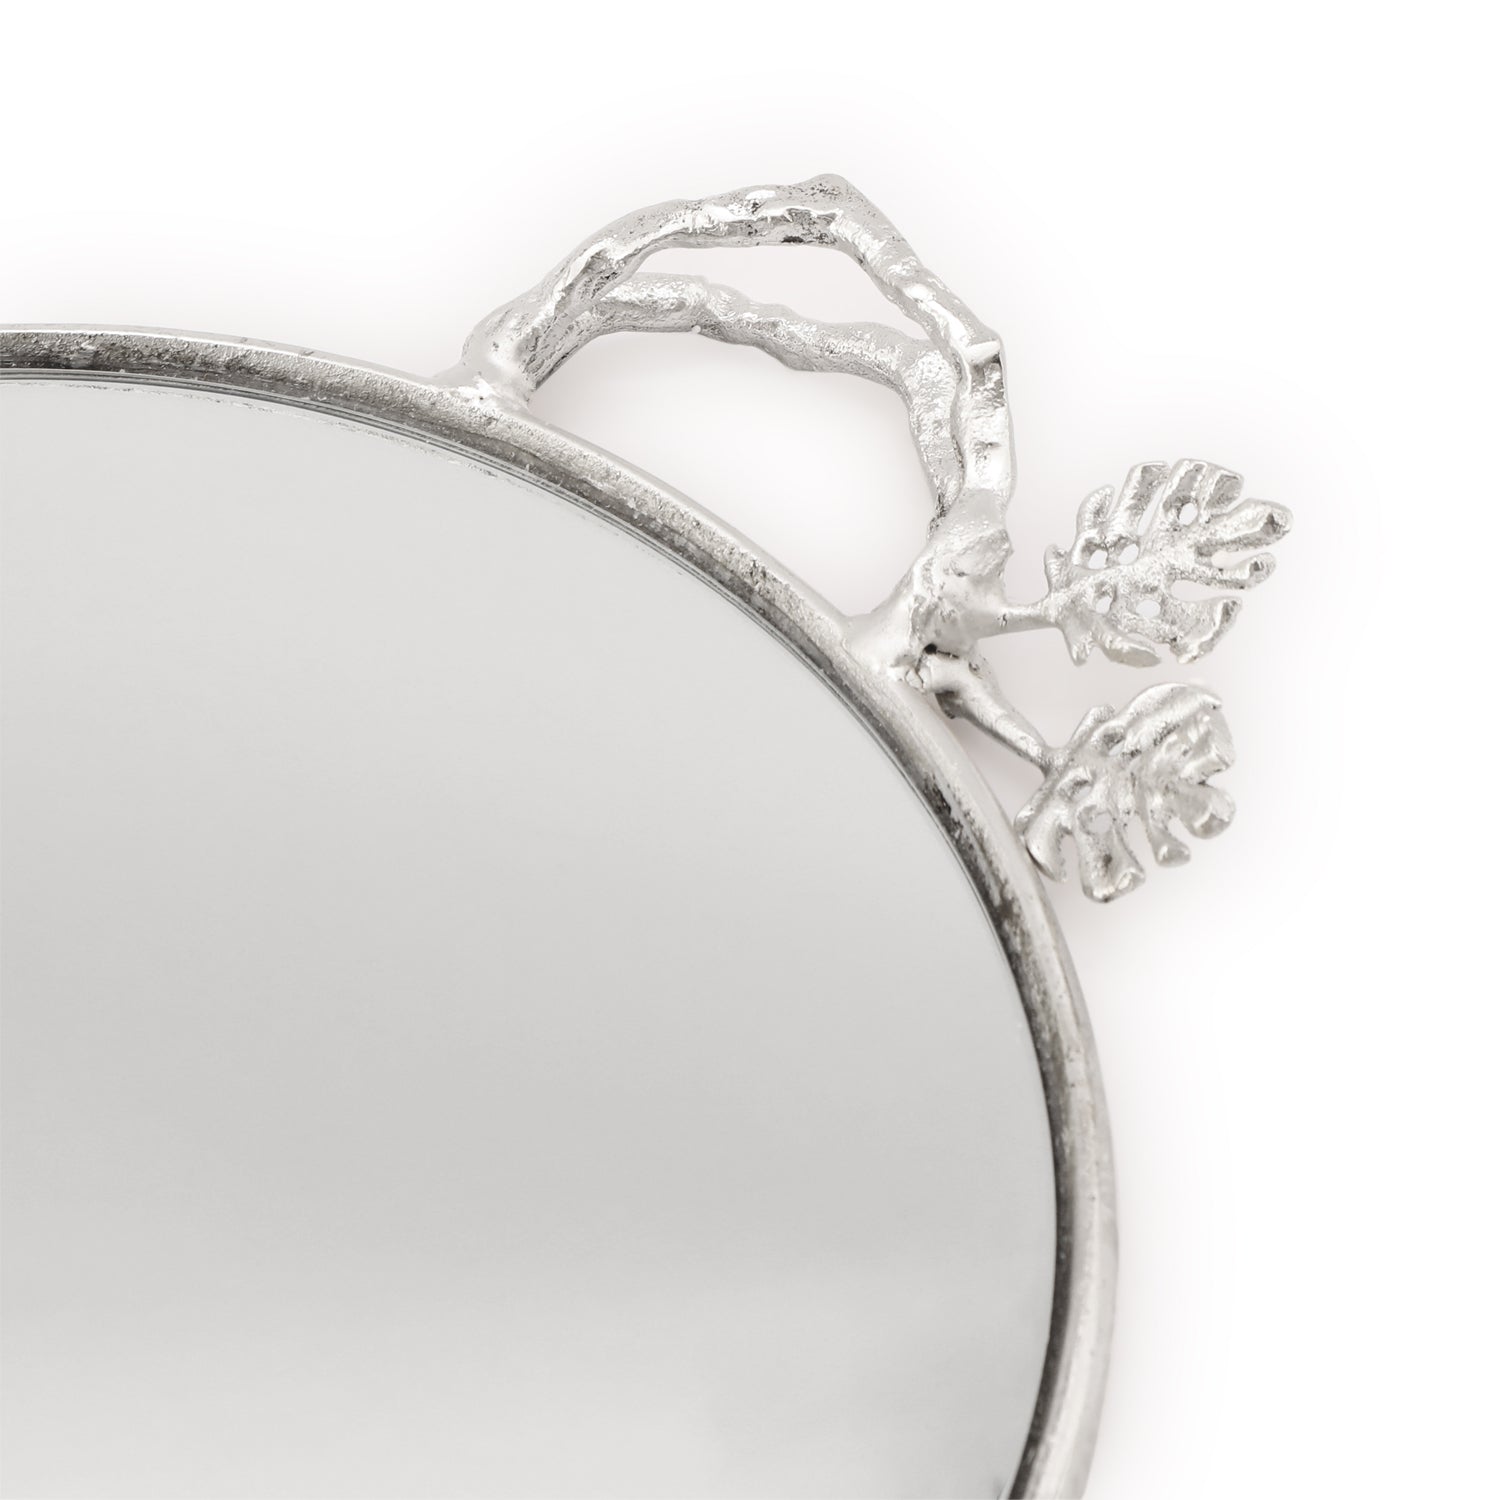 Mirror Tray - Silver Leaf 5- The Home Co.